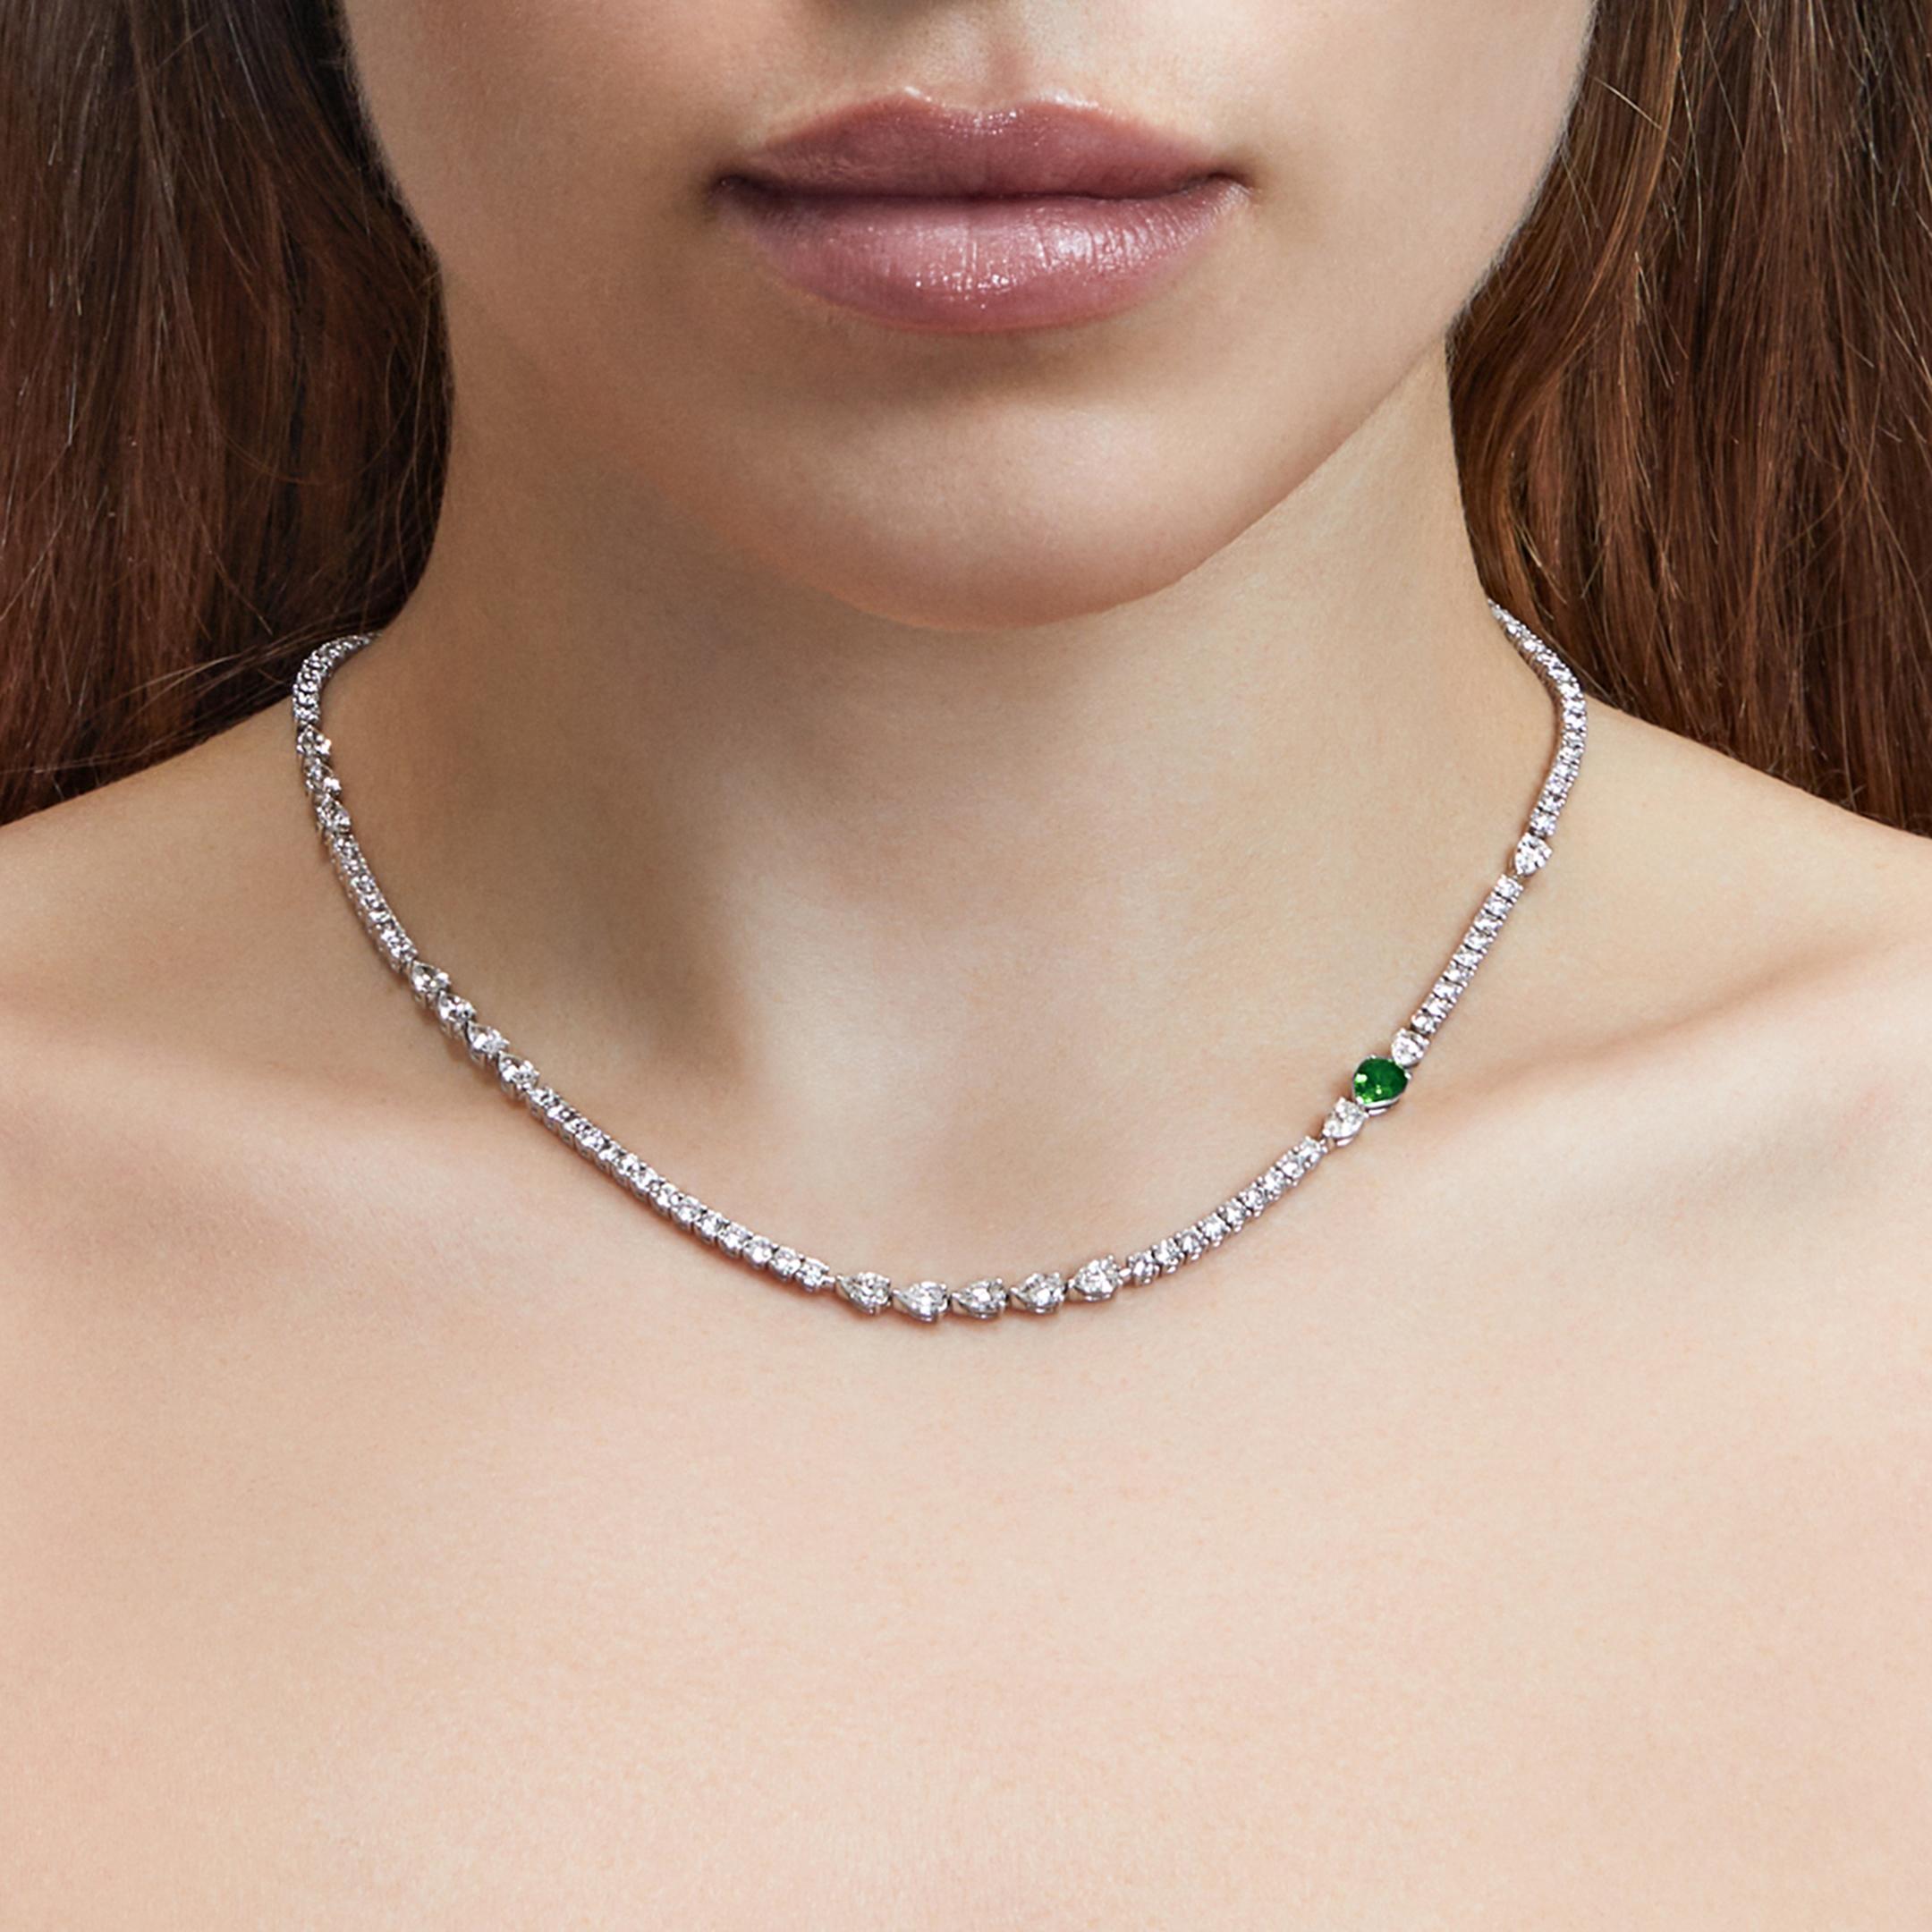 Meet the Not Your Average Diamond Tennis Necklace. A mix of diamond shapes and a pop of color make the Diamond Tennis Necklace with Emerald so much more. Sections of pear-shaped diamonds alternate with round brilliant-cut diamonds for visual